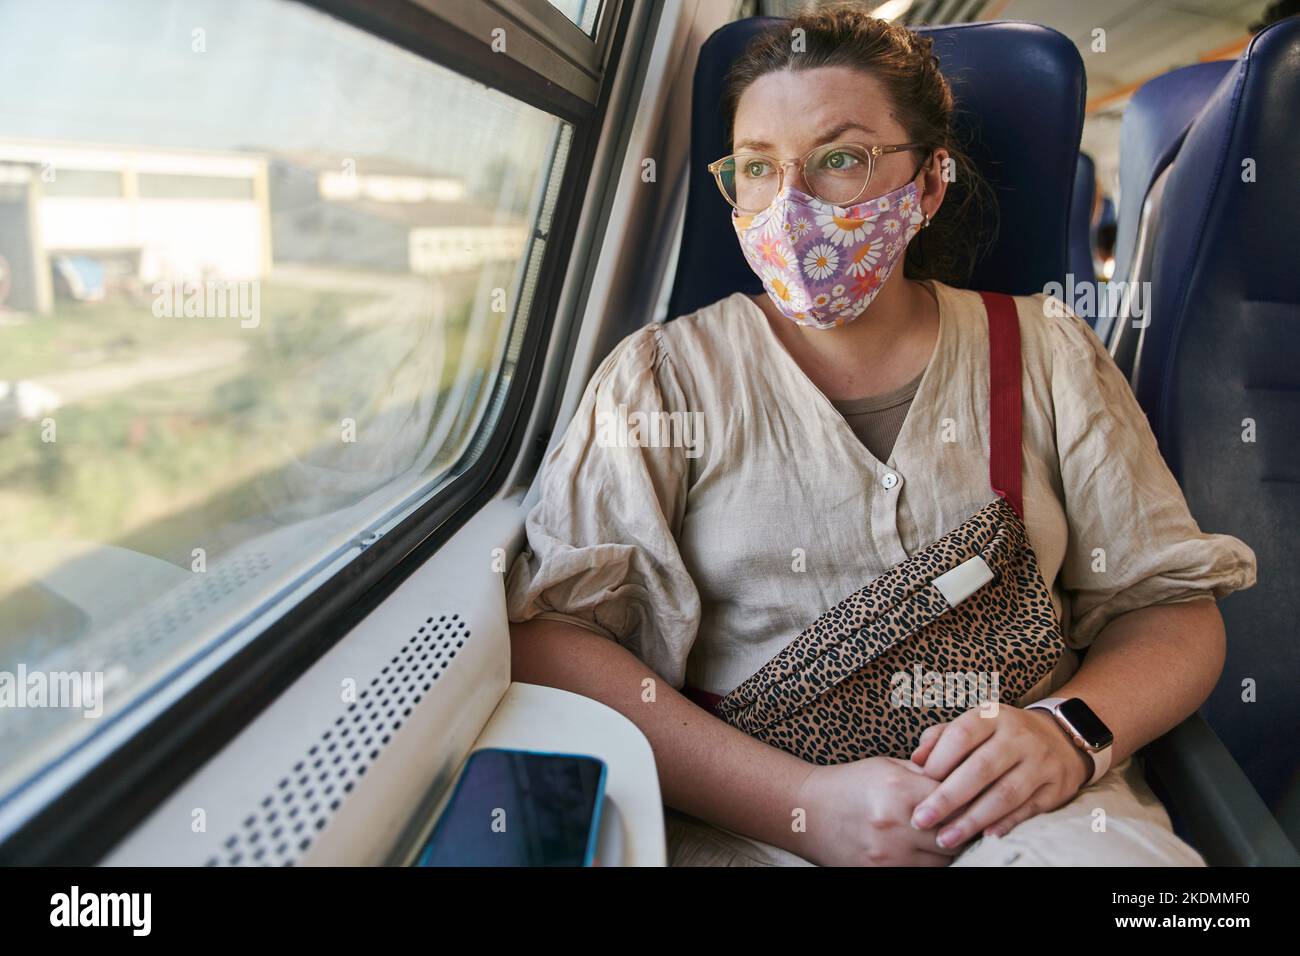 A girl in glasses and a medical mask riding a train and looking out the window Stock Photo